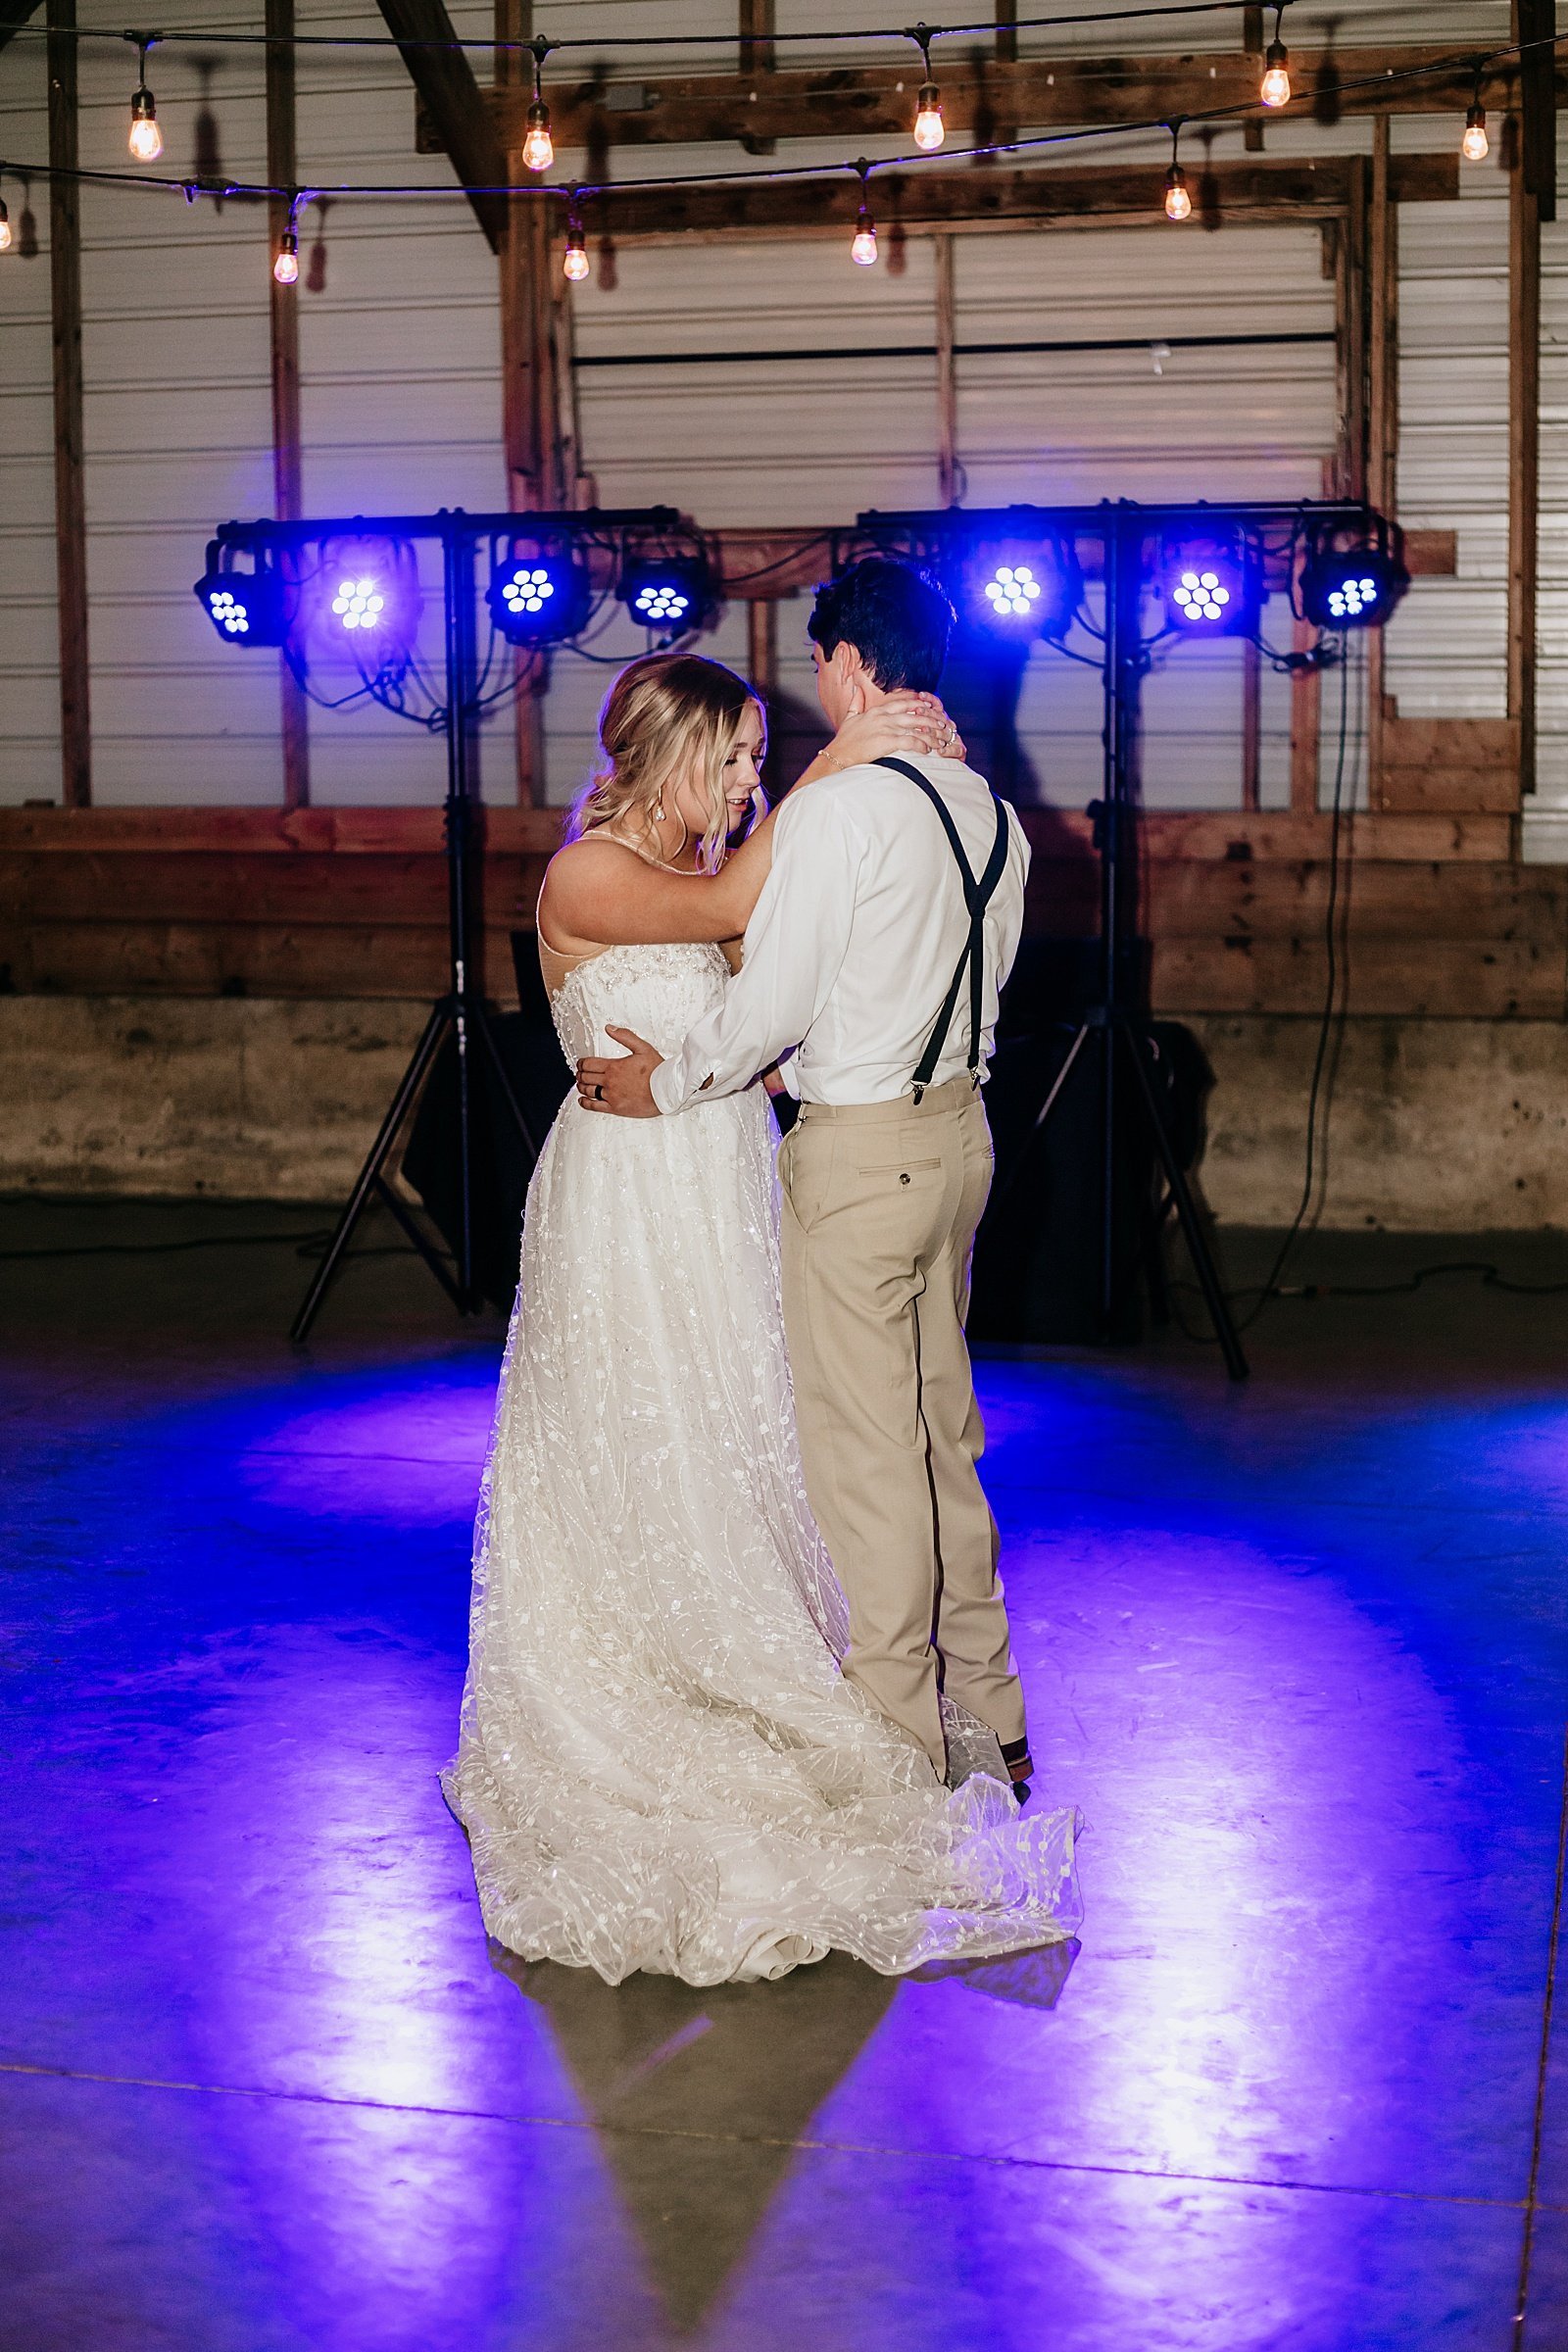  Newlyweds share a first dance under blue lights at their outdoor reception at The Cottage Farmhouse 